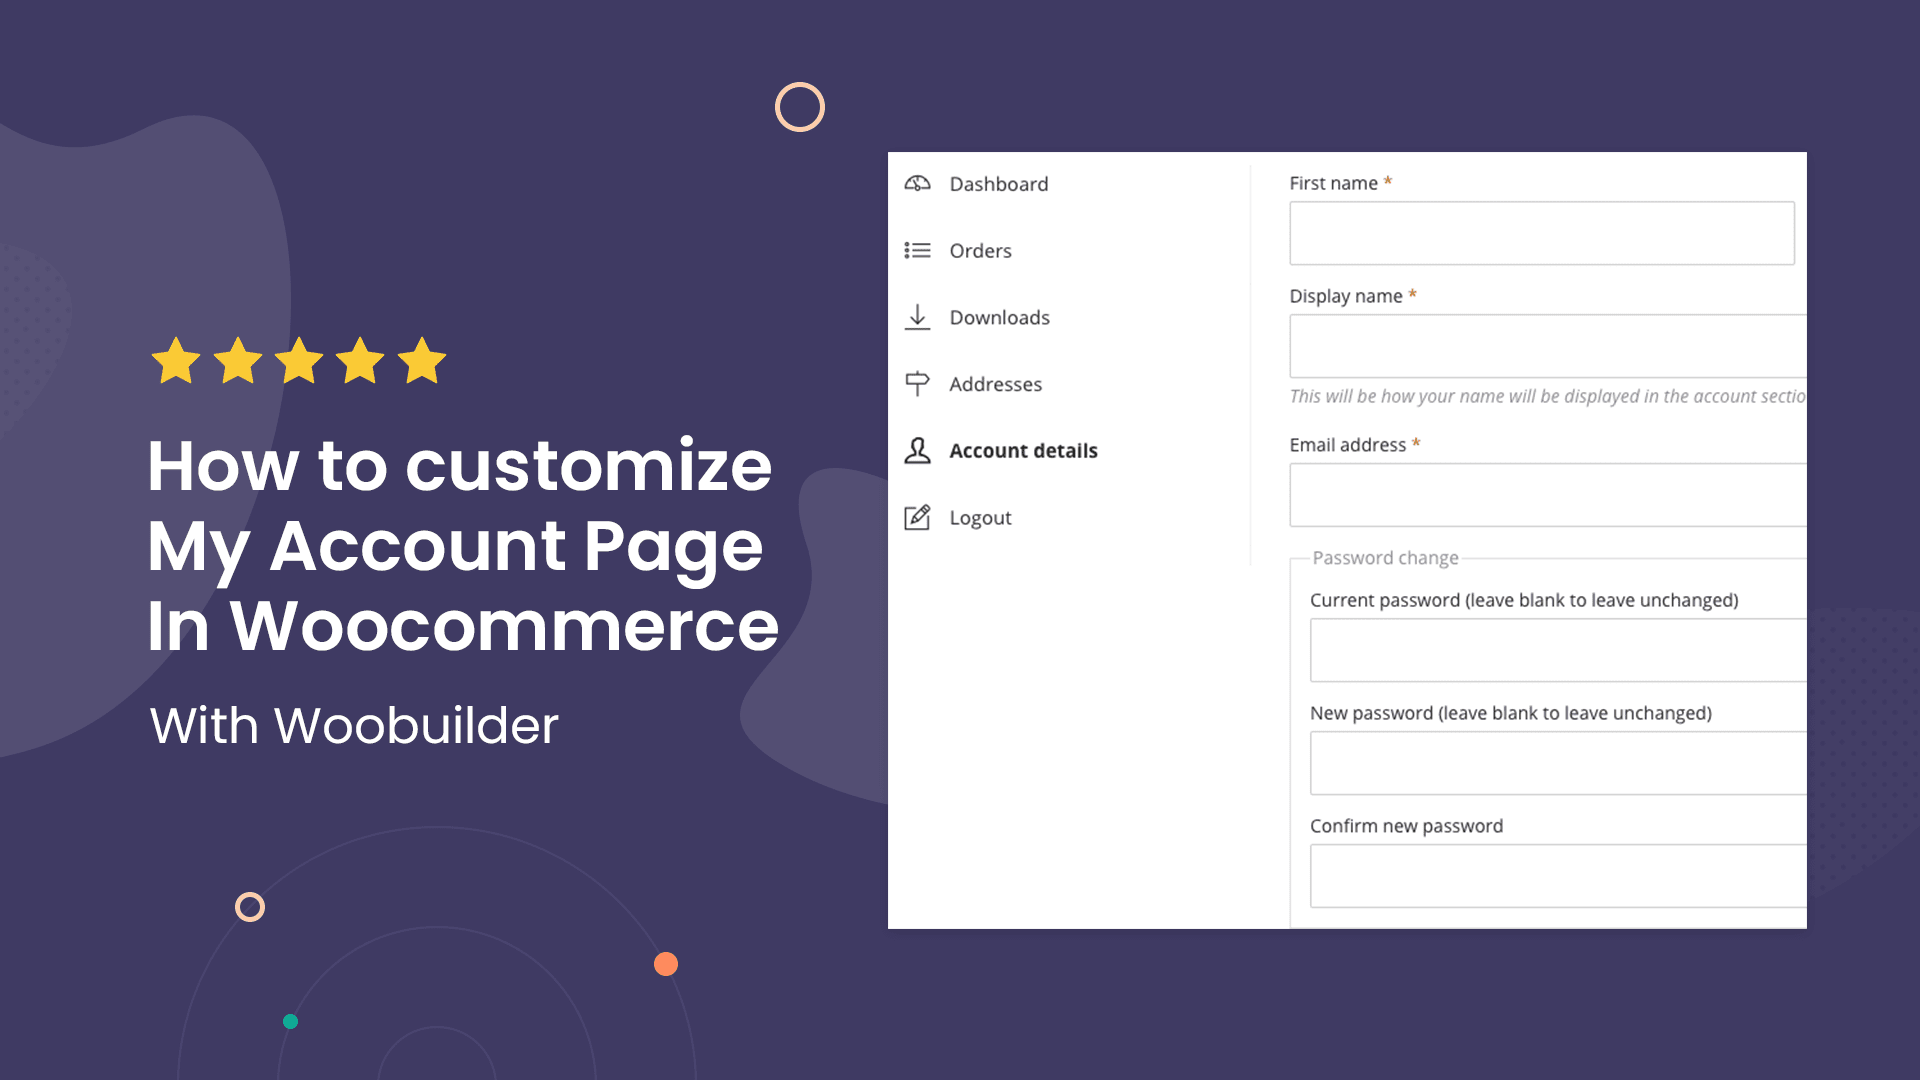 https://woostify.com/wp-content/uploads/2021/04/customize-woocommerce-my-account-page-1.png